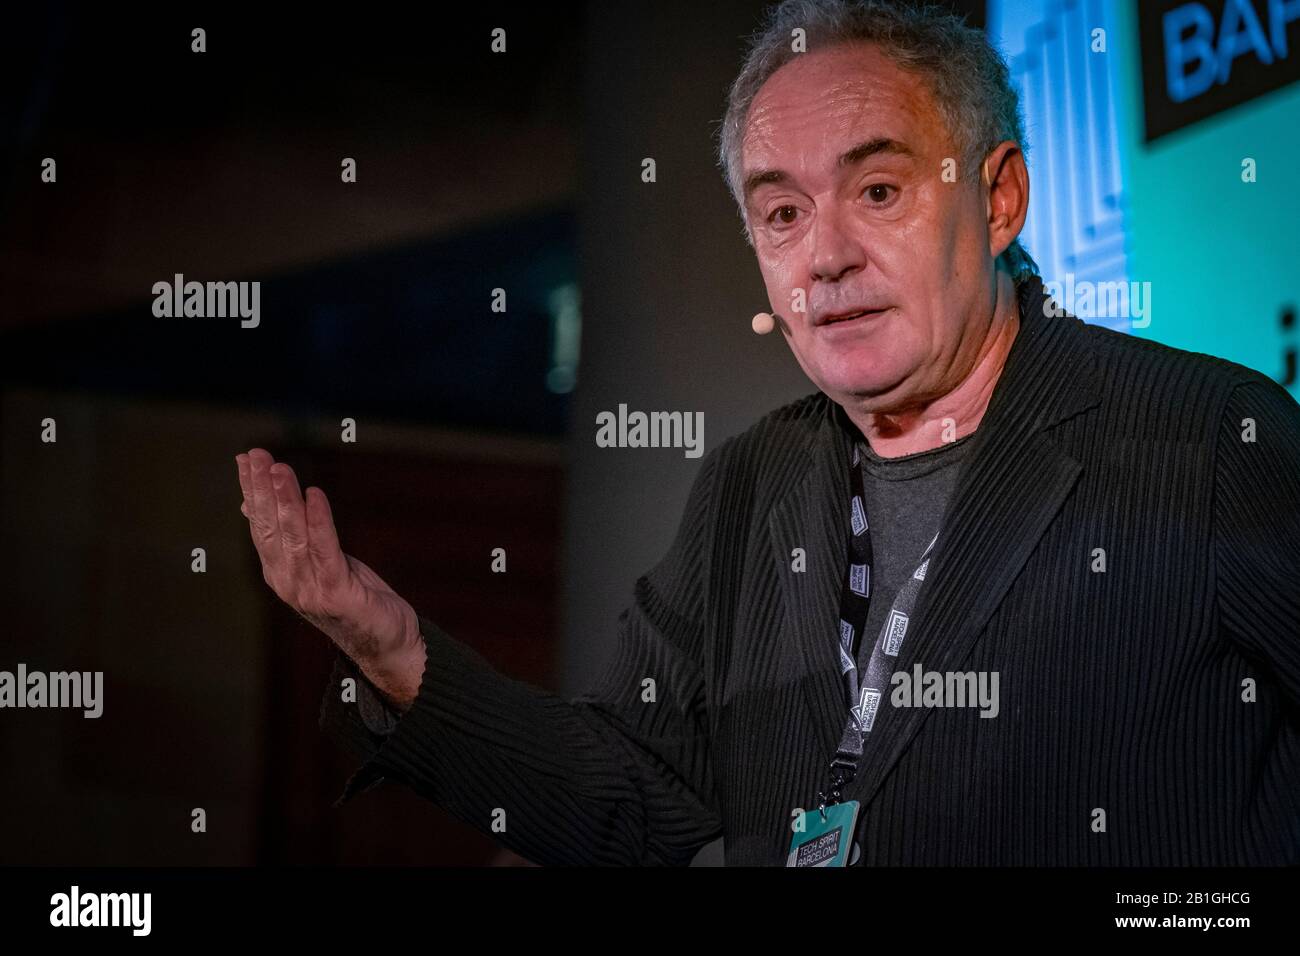 Ferran Adrià Acosta, founder of the award-winning El Bullí restaurant in Cala Montjoi speaking during the event.First day of Tech Spirit Barcelona, an improvised alternative congress to Mobile World Congress 2020 (MWC2020), which aims at gathering new talents, business innovation and sponsors to promote the creation of new business initiatives. Stock Photo